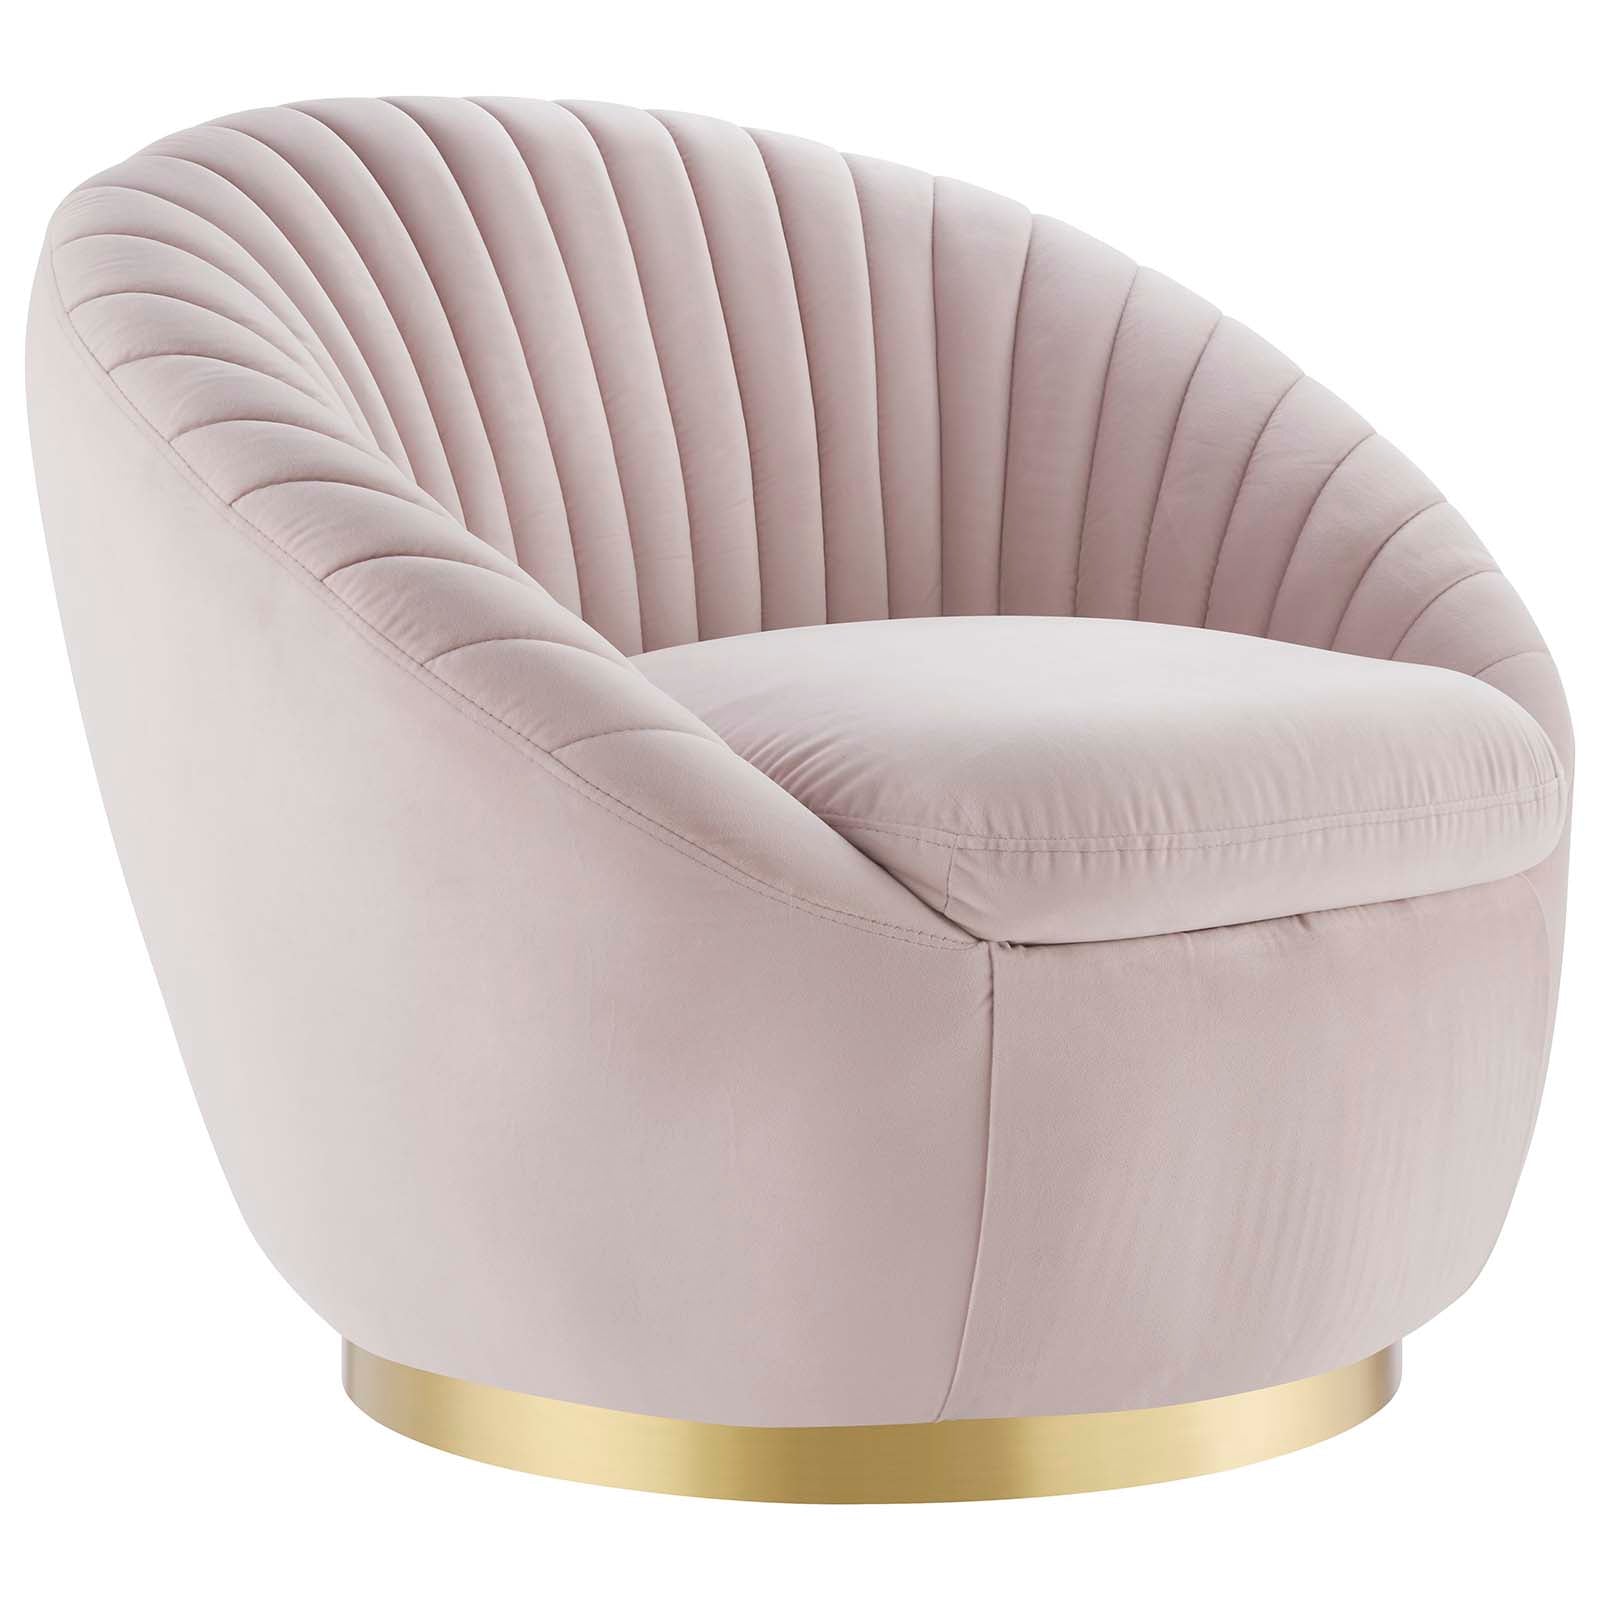 Modway Accent Chairs - Whirr Tufted Performance Velvet Performance Velvet Swivel Chair Gold Pink